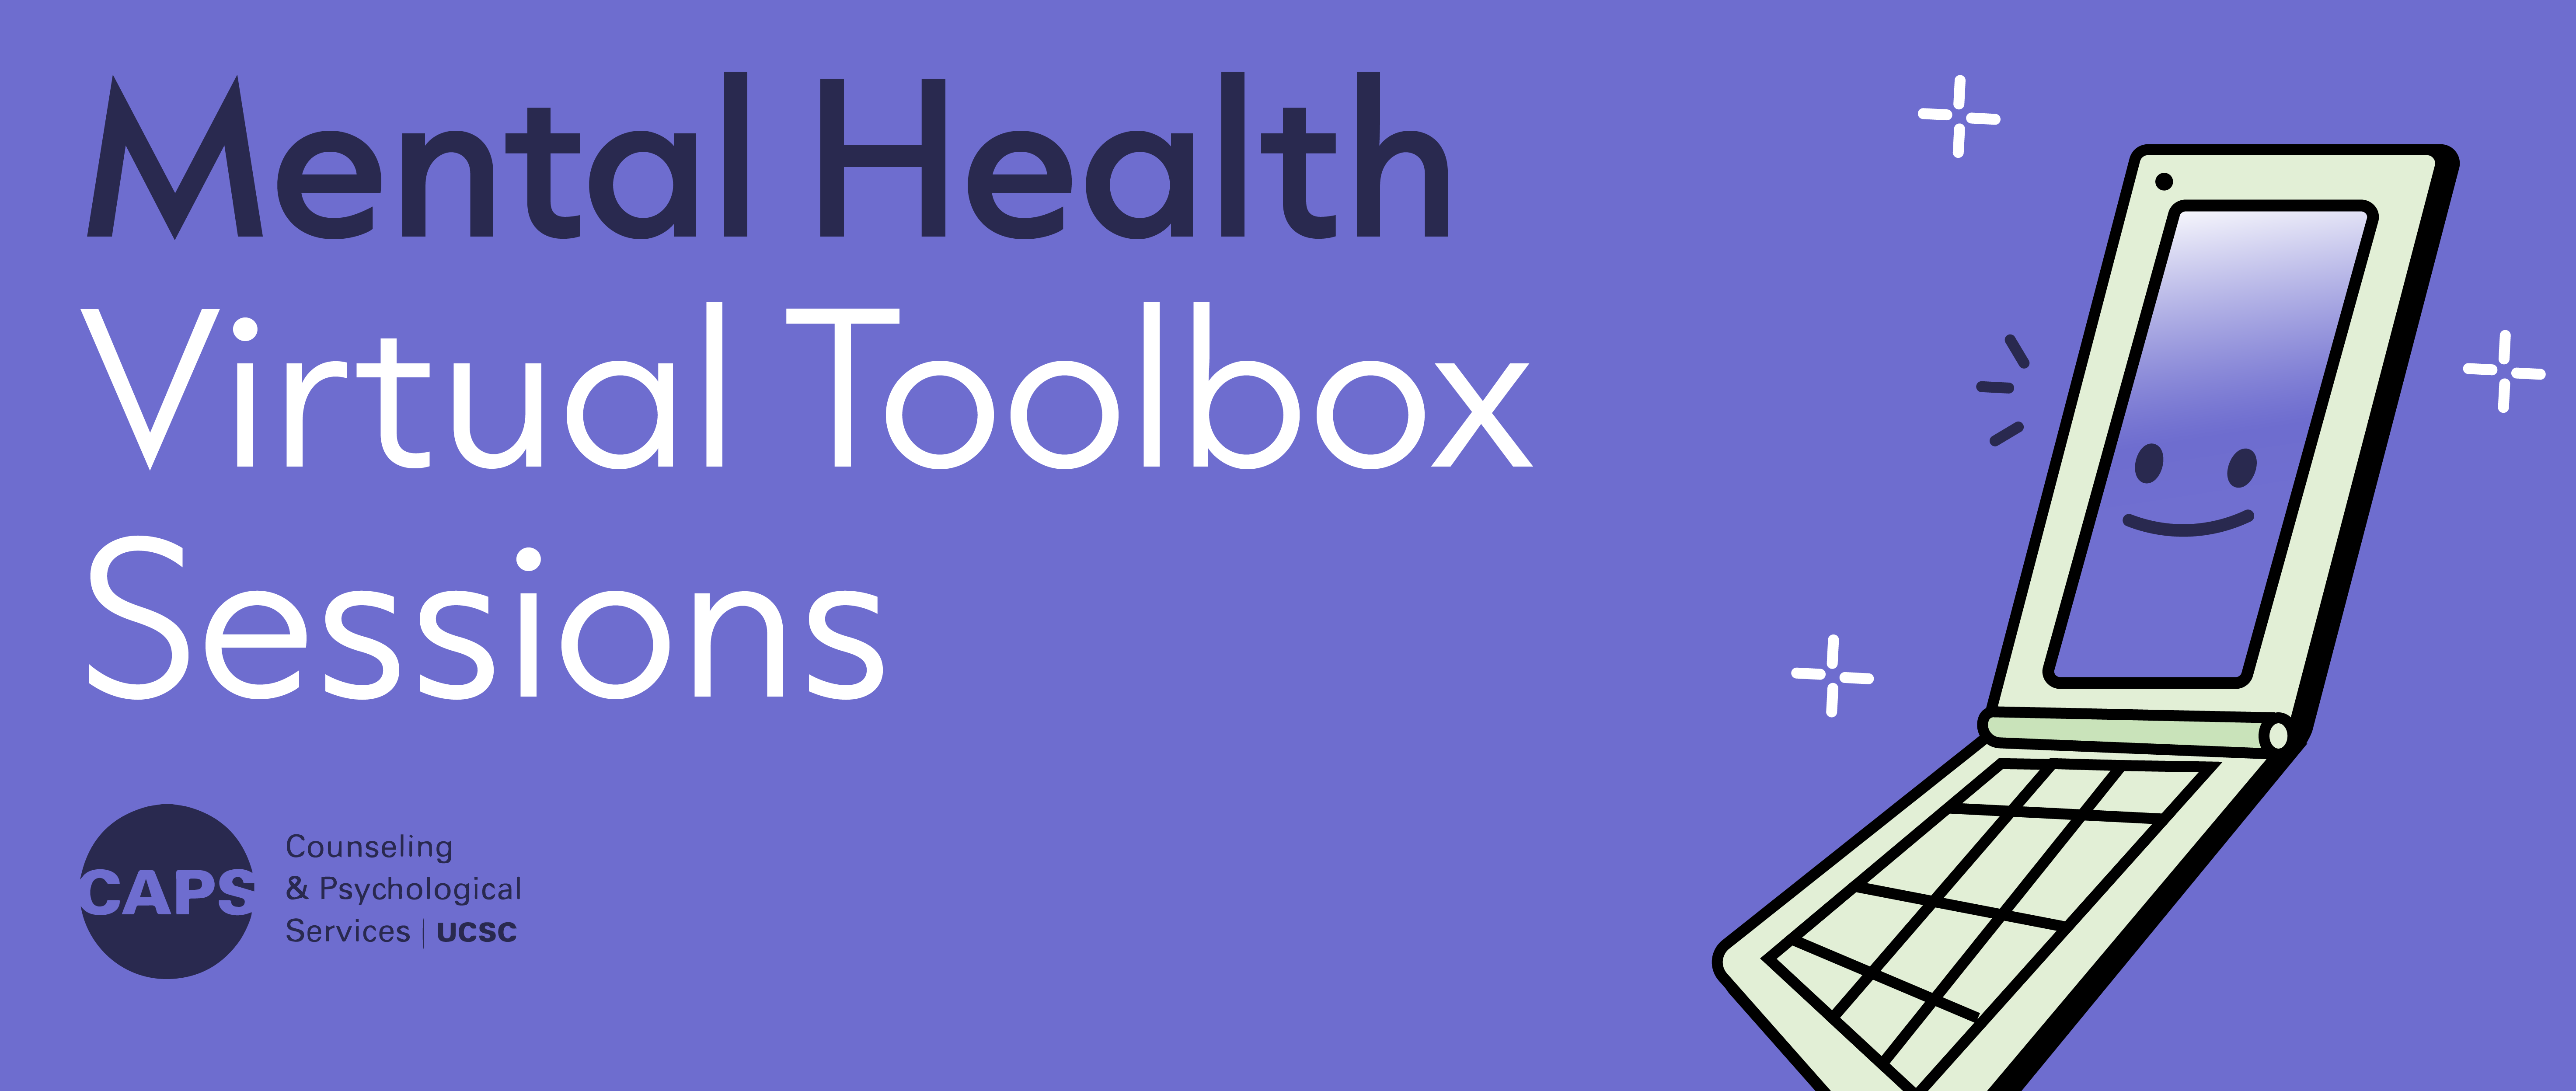 Virtual Toolbox Images: laptop, notebook, balance, lungs, time management and toolbox. 